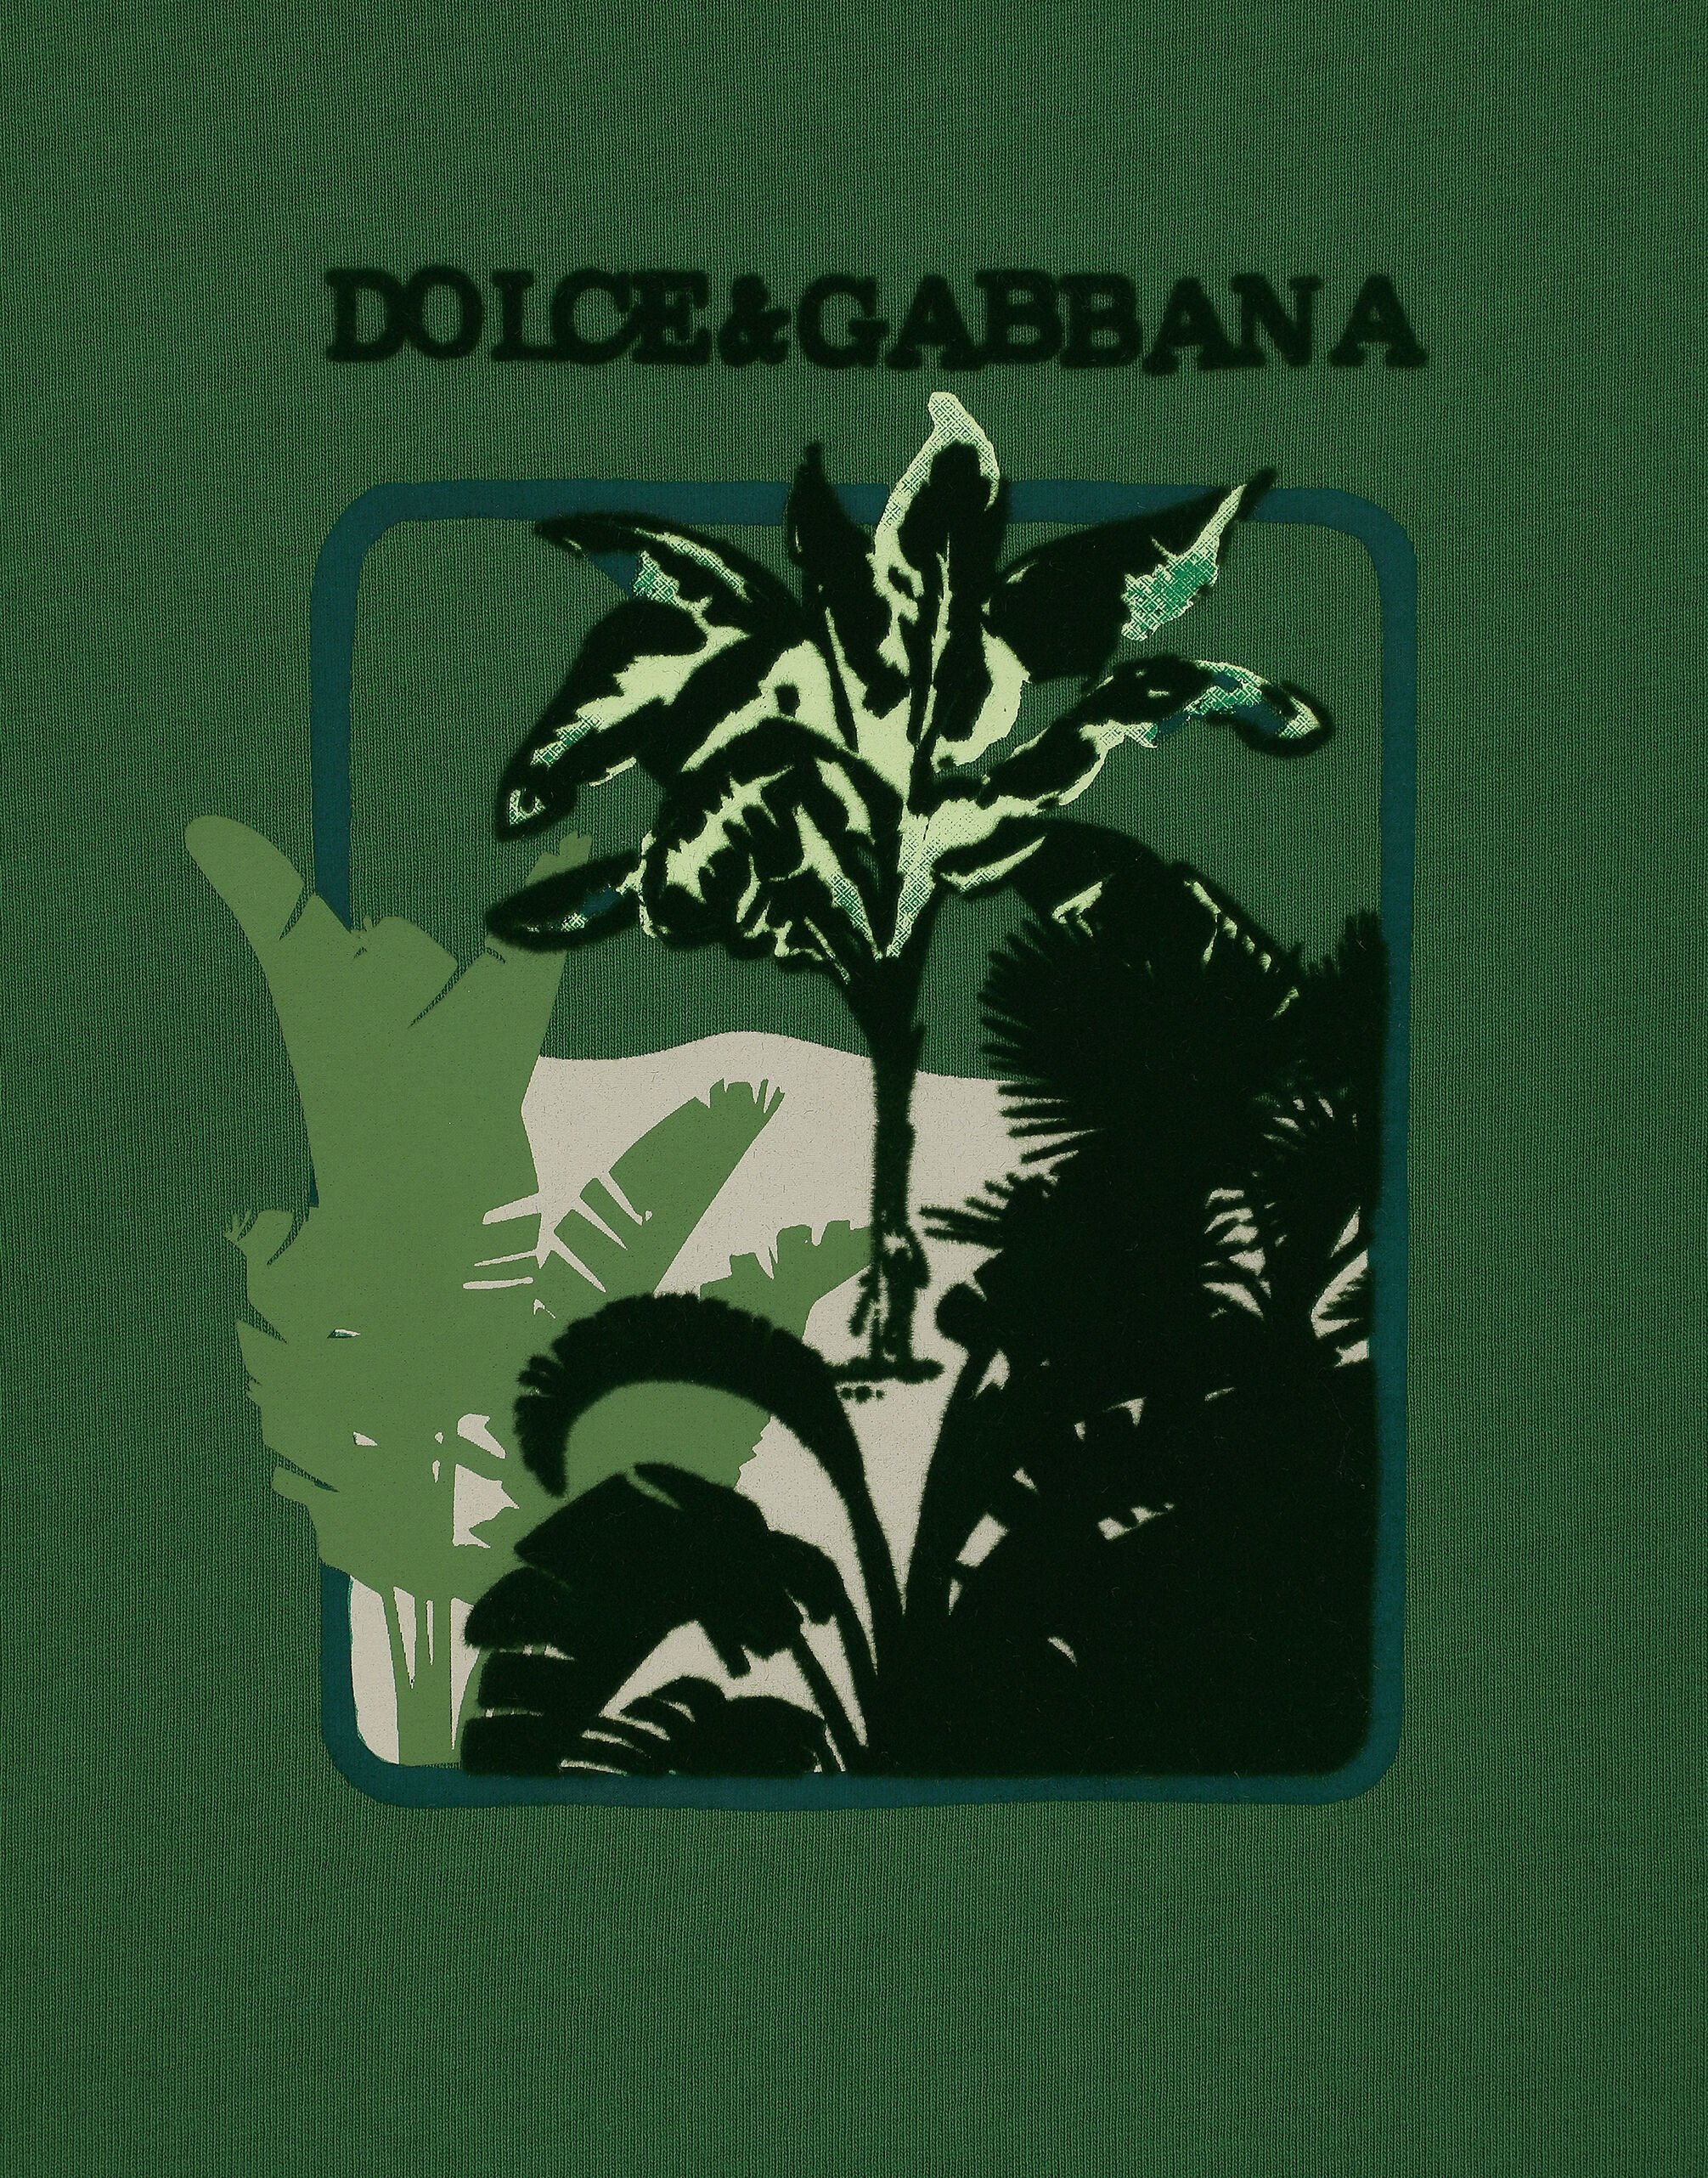 Short-sleeved cotton T-shirt with banana tree print in Green for 